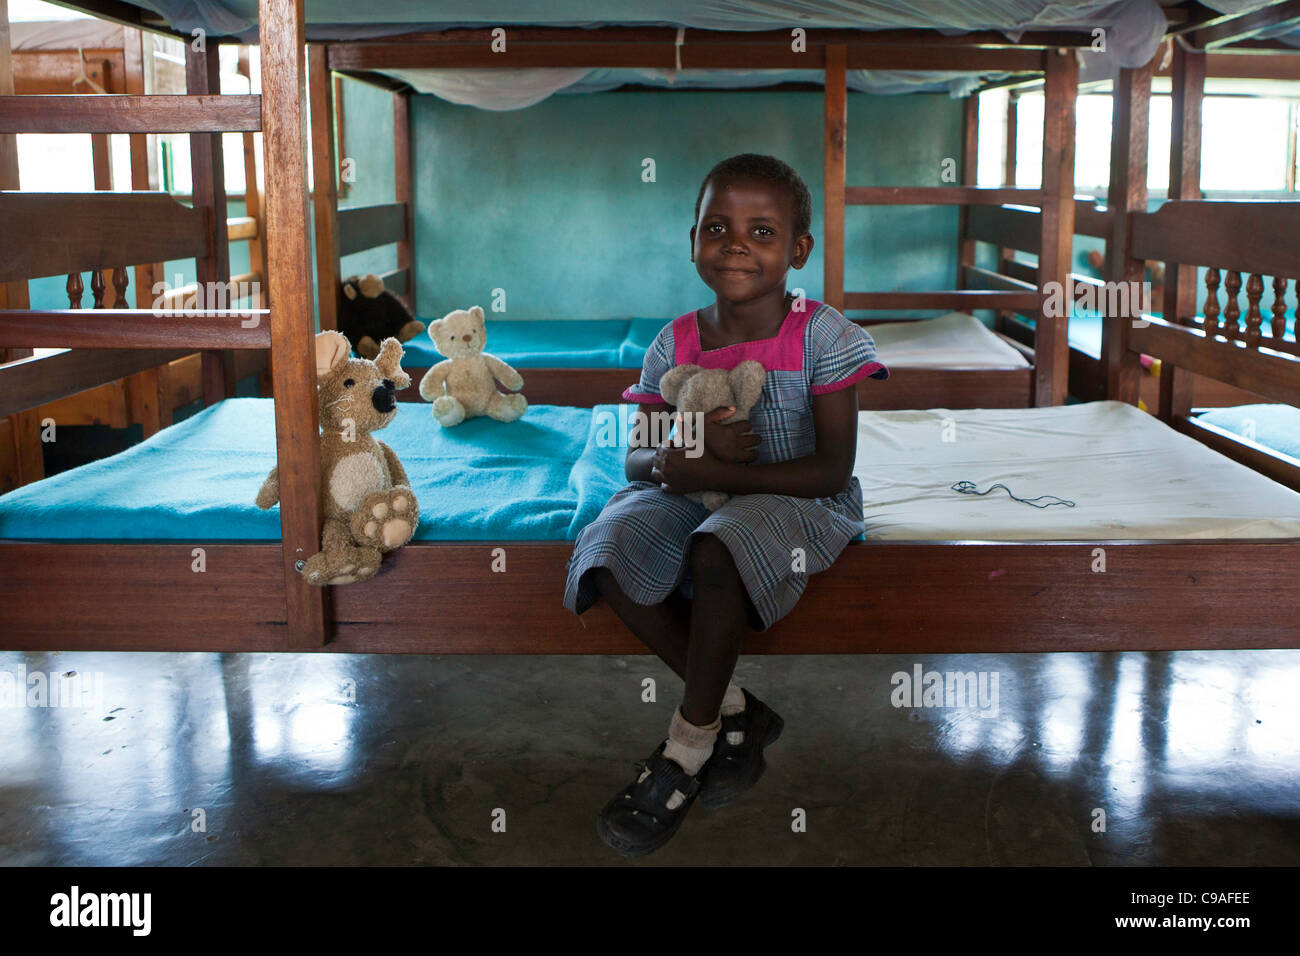 Mary at the Wema centre for girls. Wema is an NGO organisation supporting vulnerable children. Stock Photo